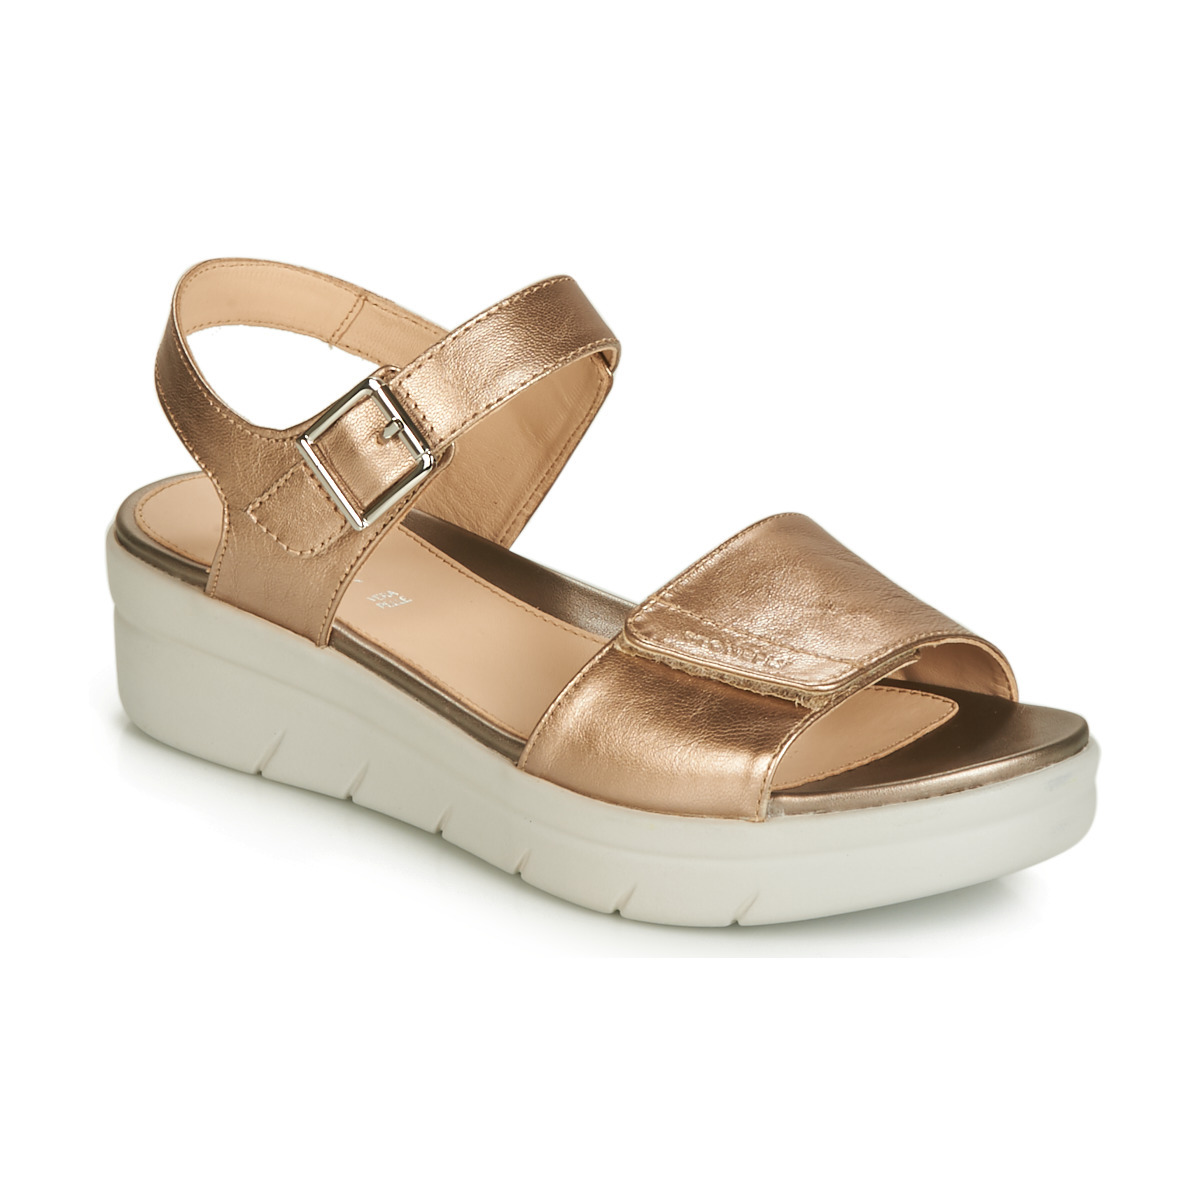 Stonefly - Gold Sandals for Women at Spartoo GOOFASH